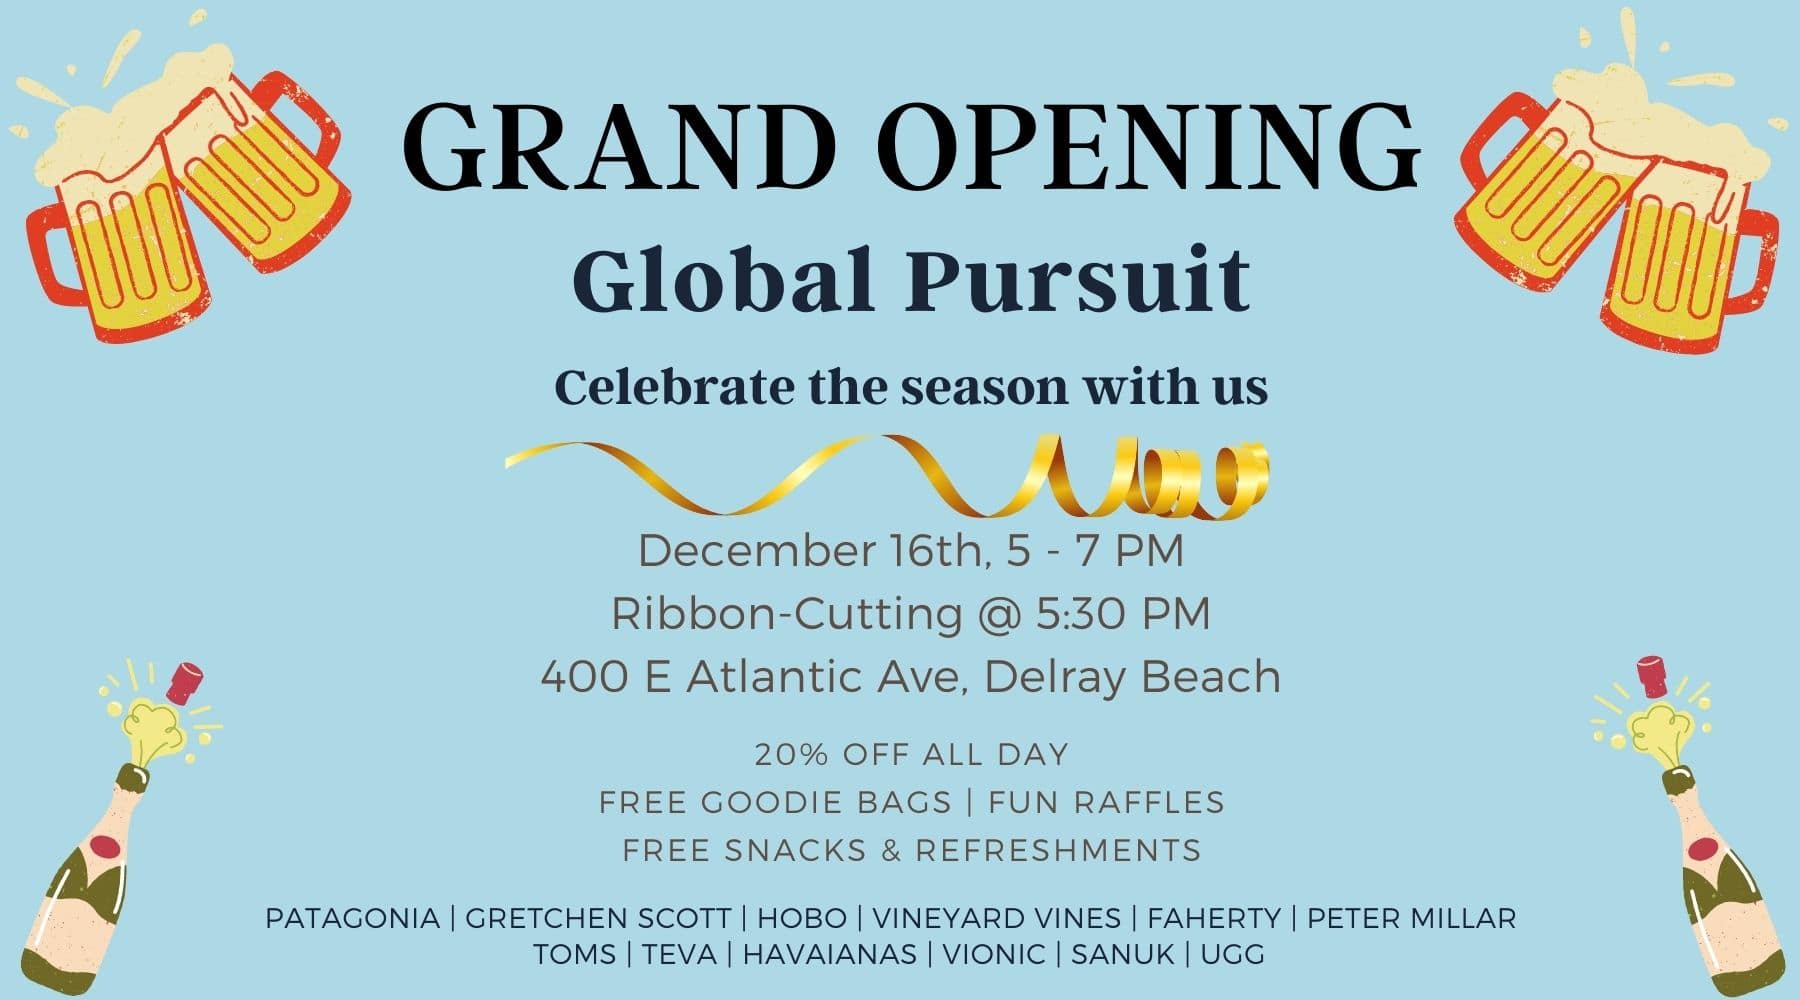 Grand Opening of Global Pursuit Delray